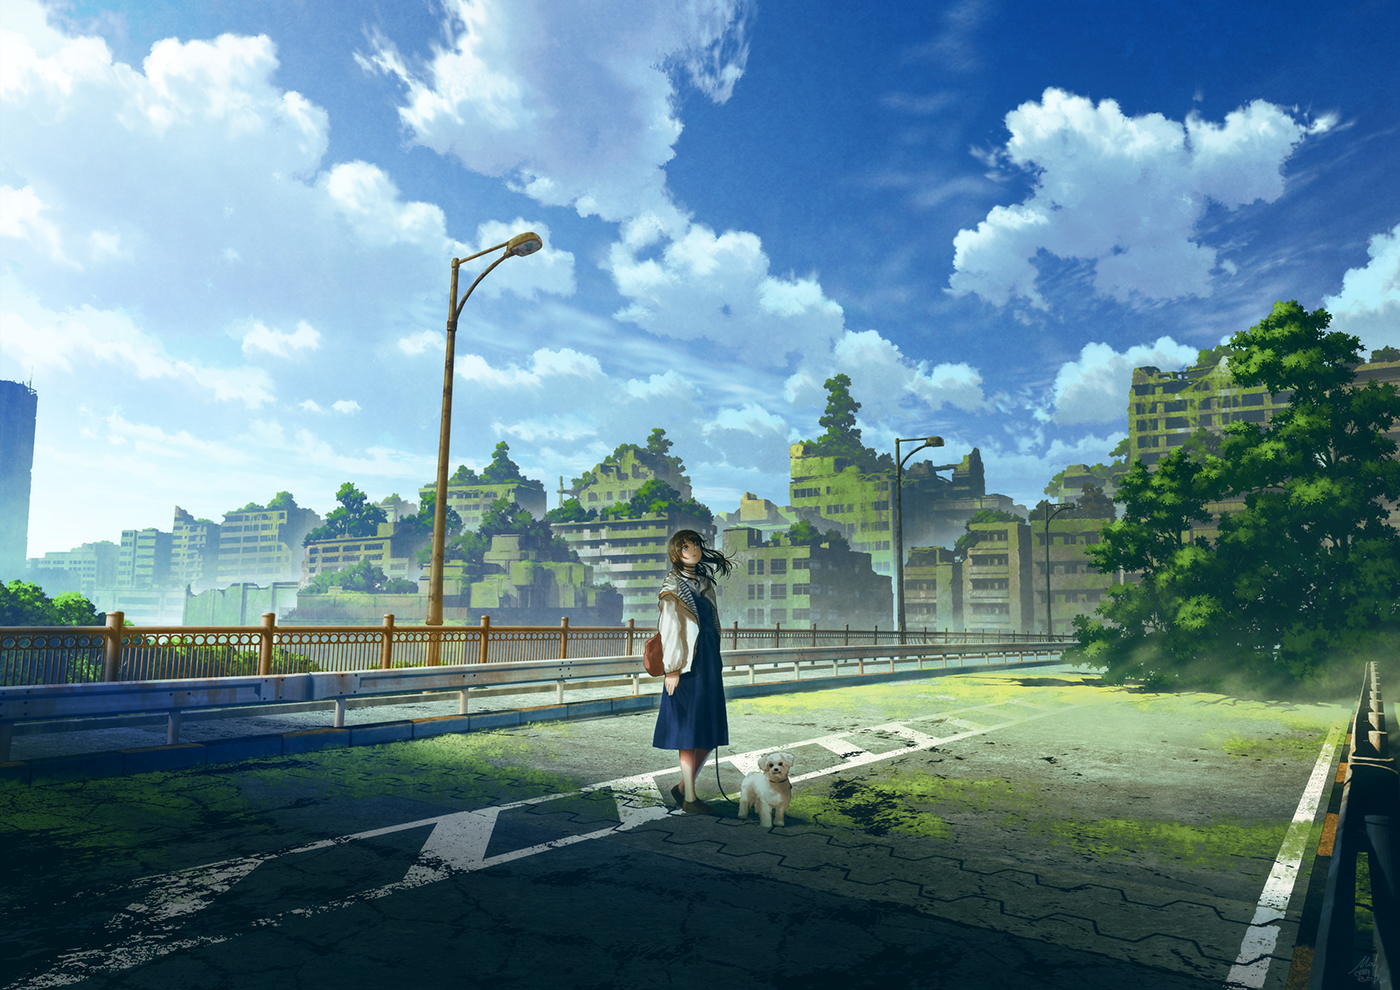 General 1400x990 Pixiv artwork dog animals sky clouds trees city bridge hair blowing in the wind long hair women